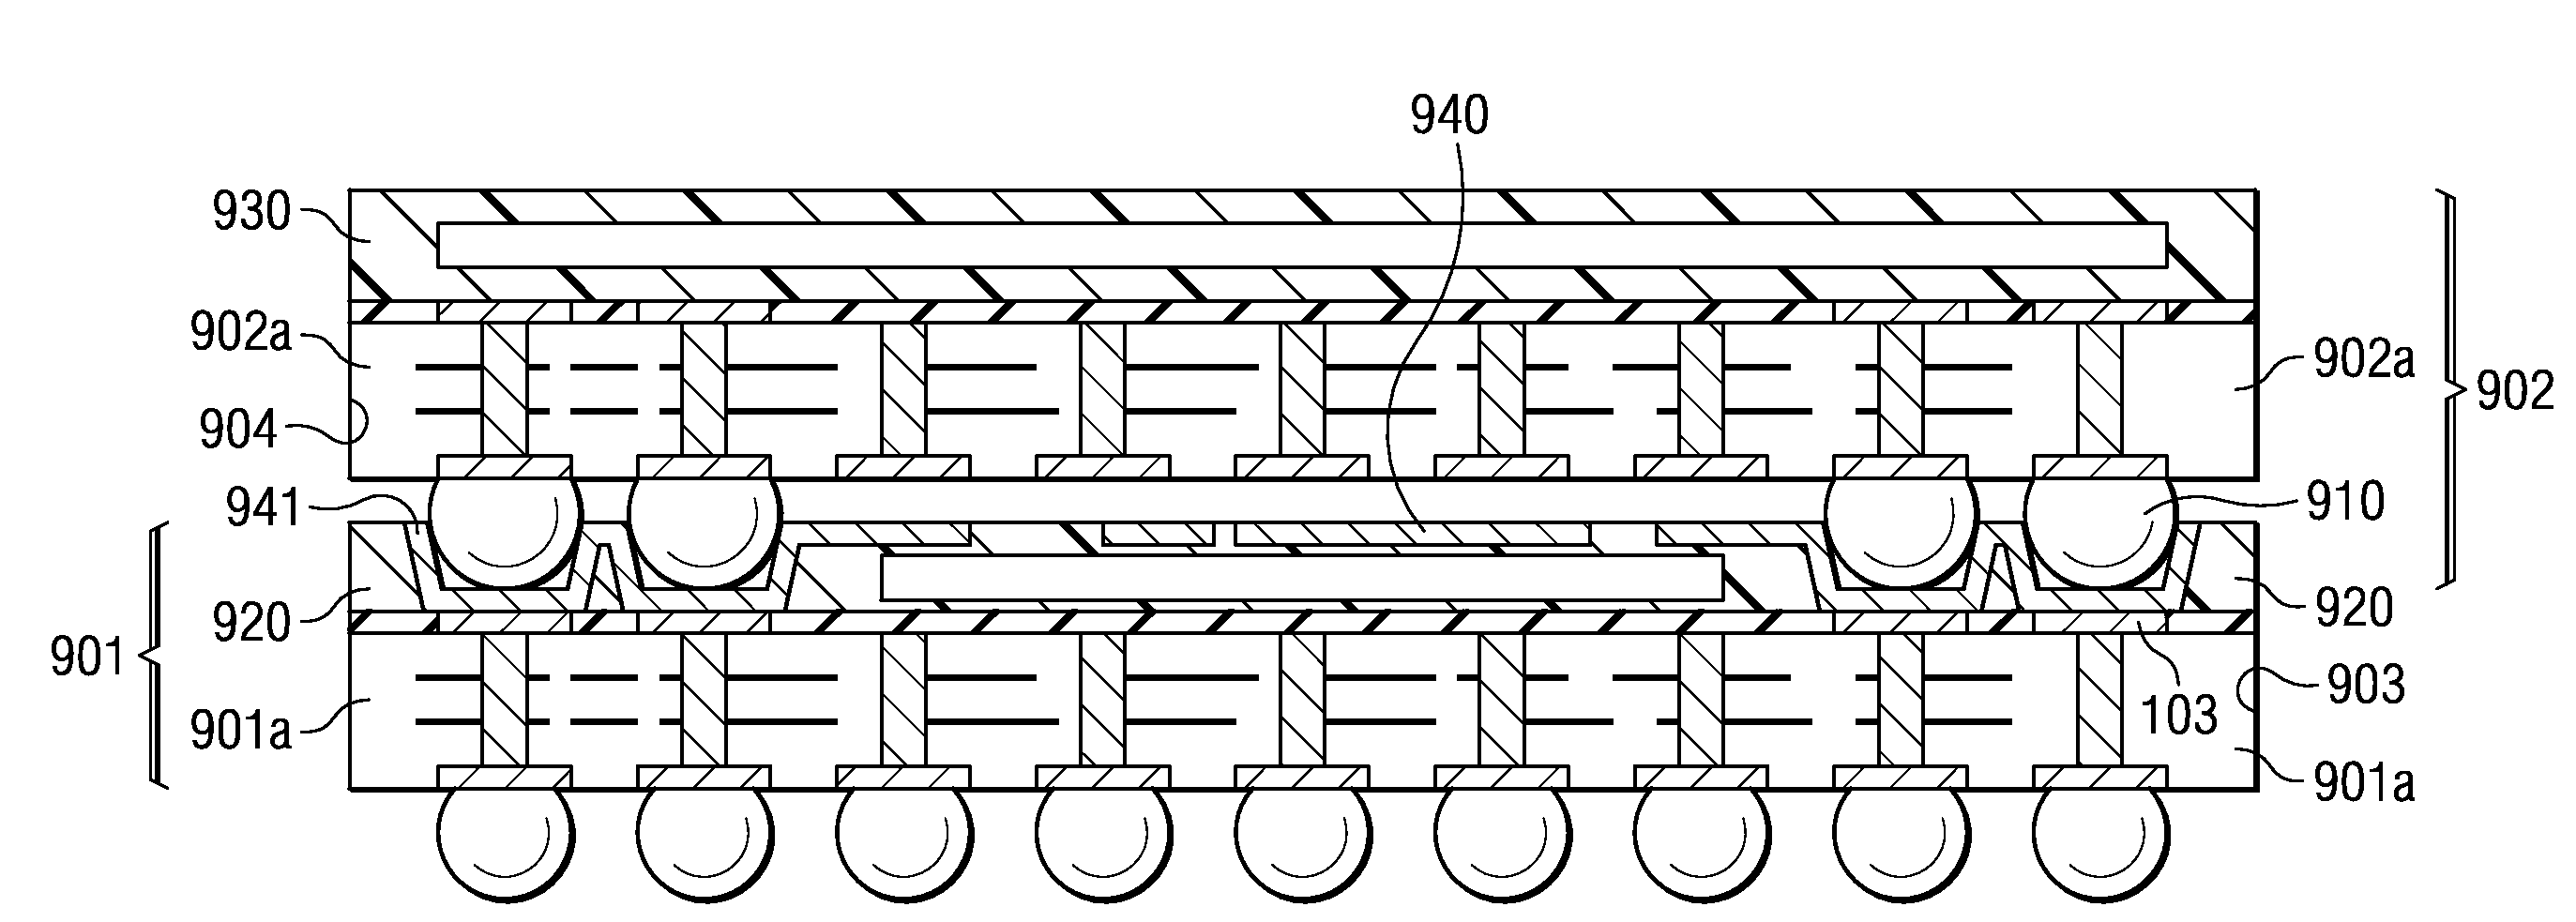 Array molded package-on-package having redistribution lines